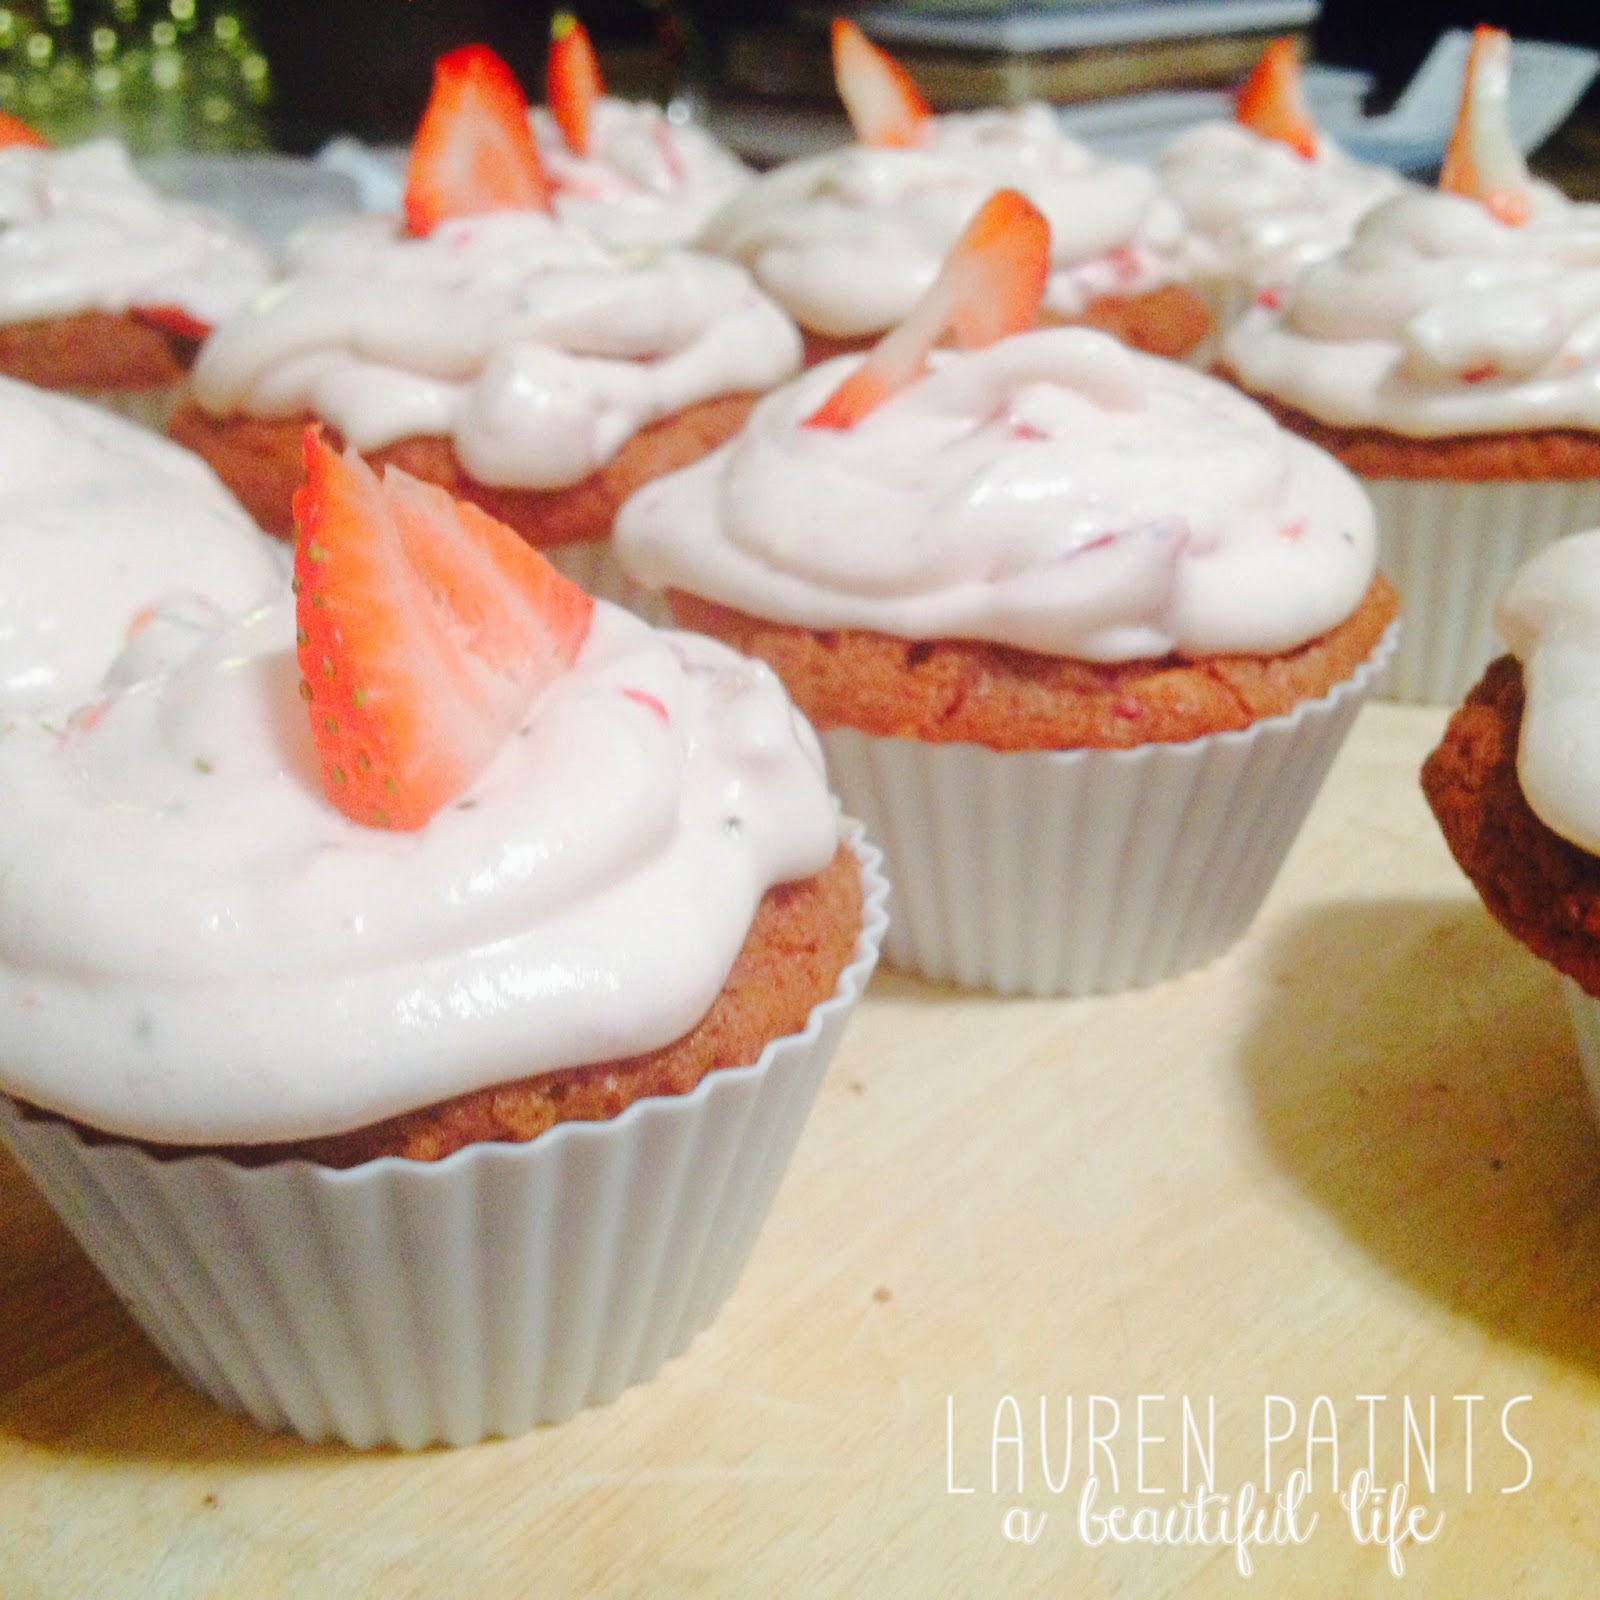 Healthy, Gluten Free, and Delicious Strawberry "Muffincake" recipe with a Strawberry Cream Icing 